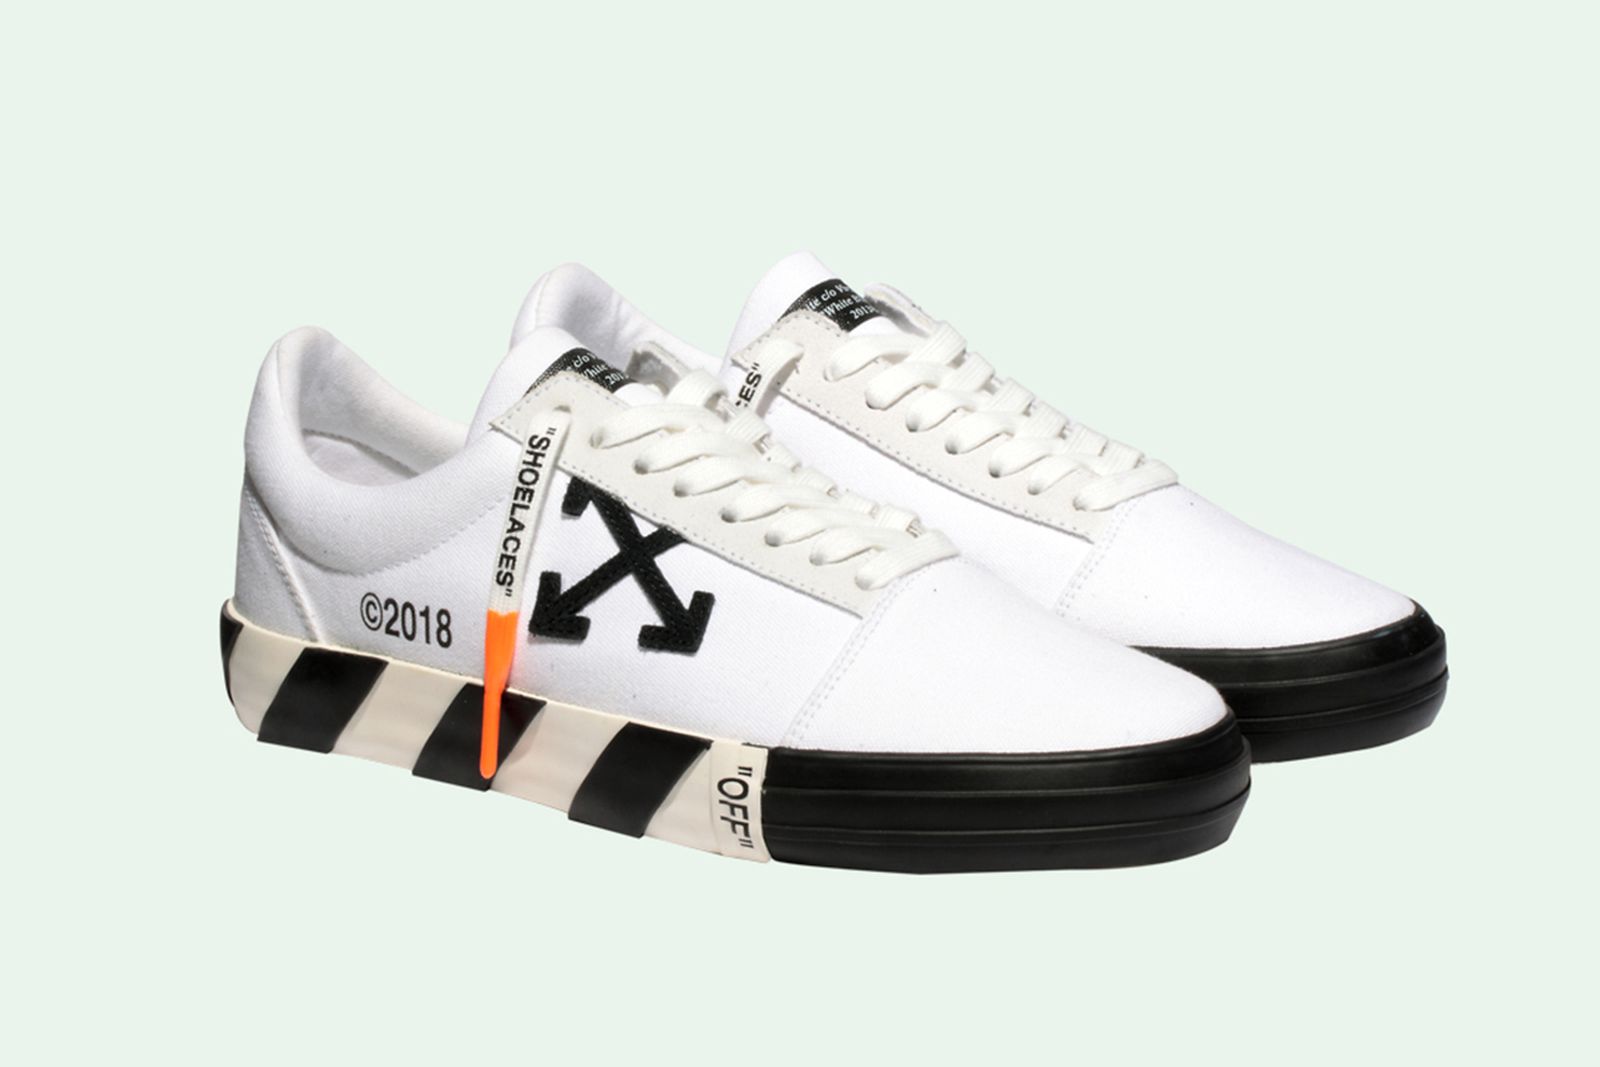 These OFF-WHITE Sneakers are the Closest Thing to a Vans